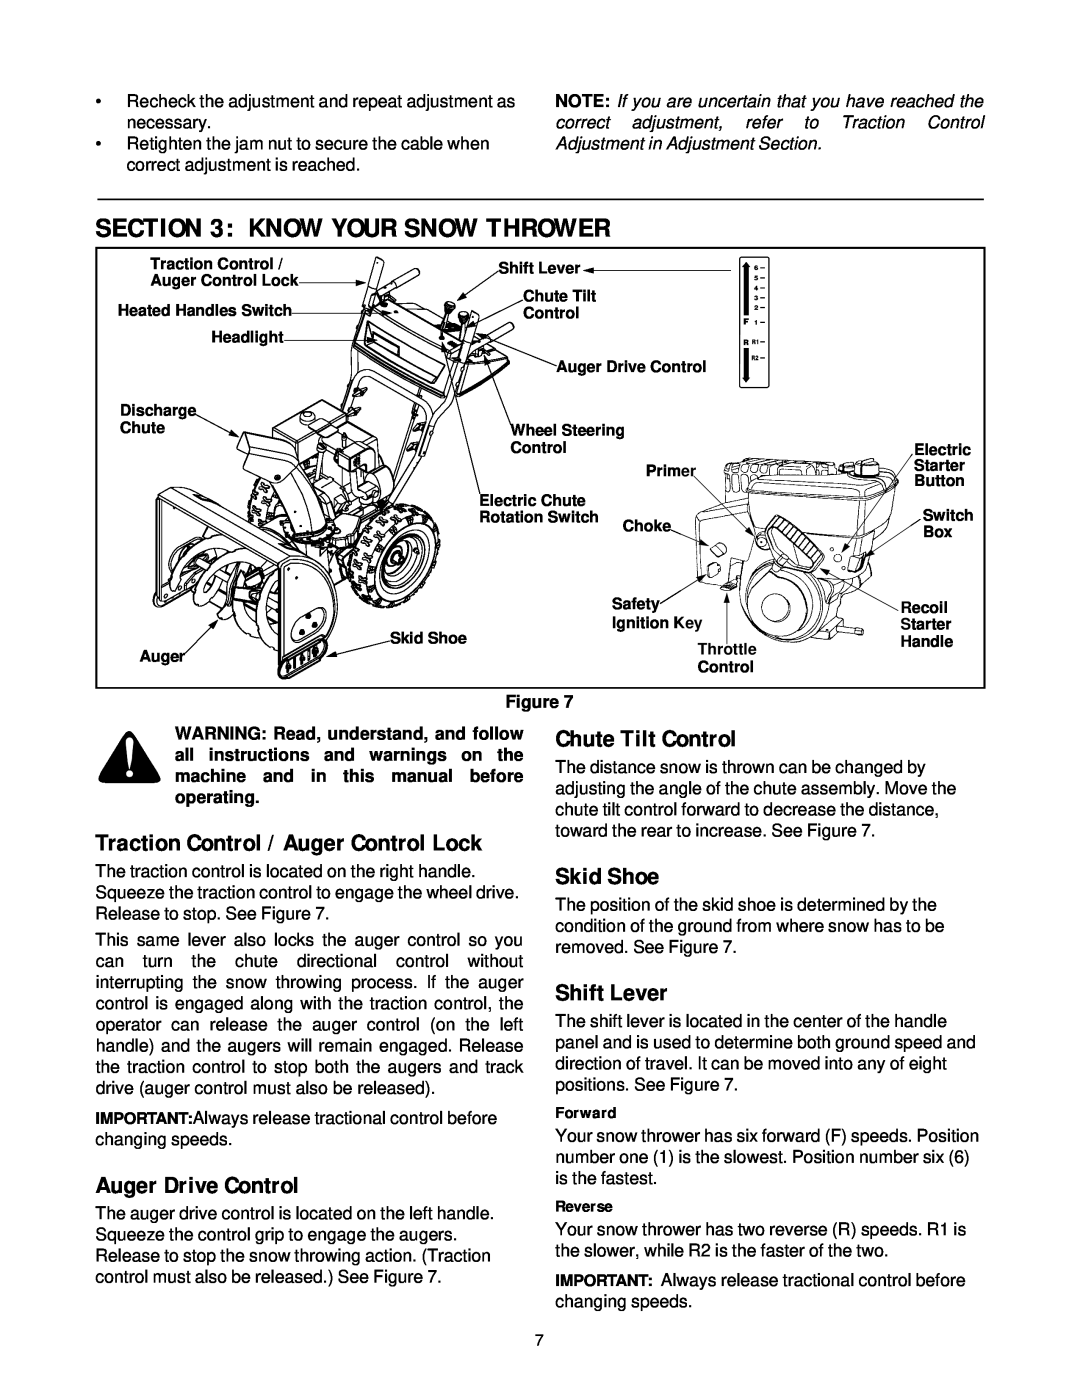 MTD 31AH5C3F401 Know Your Snow Thrower, Chute Tilt Control, Auger Drive Control, Skid Shoe, Shift Lever, Forward, Reverse 